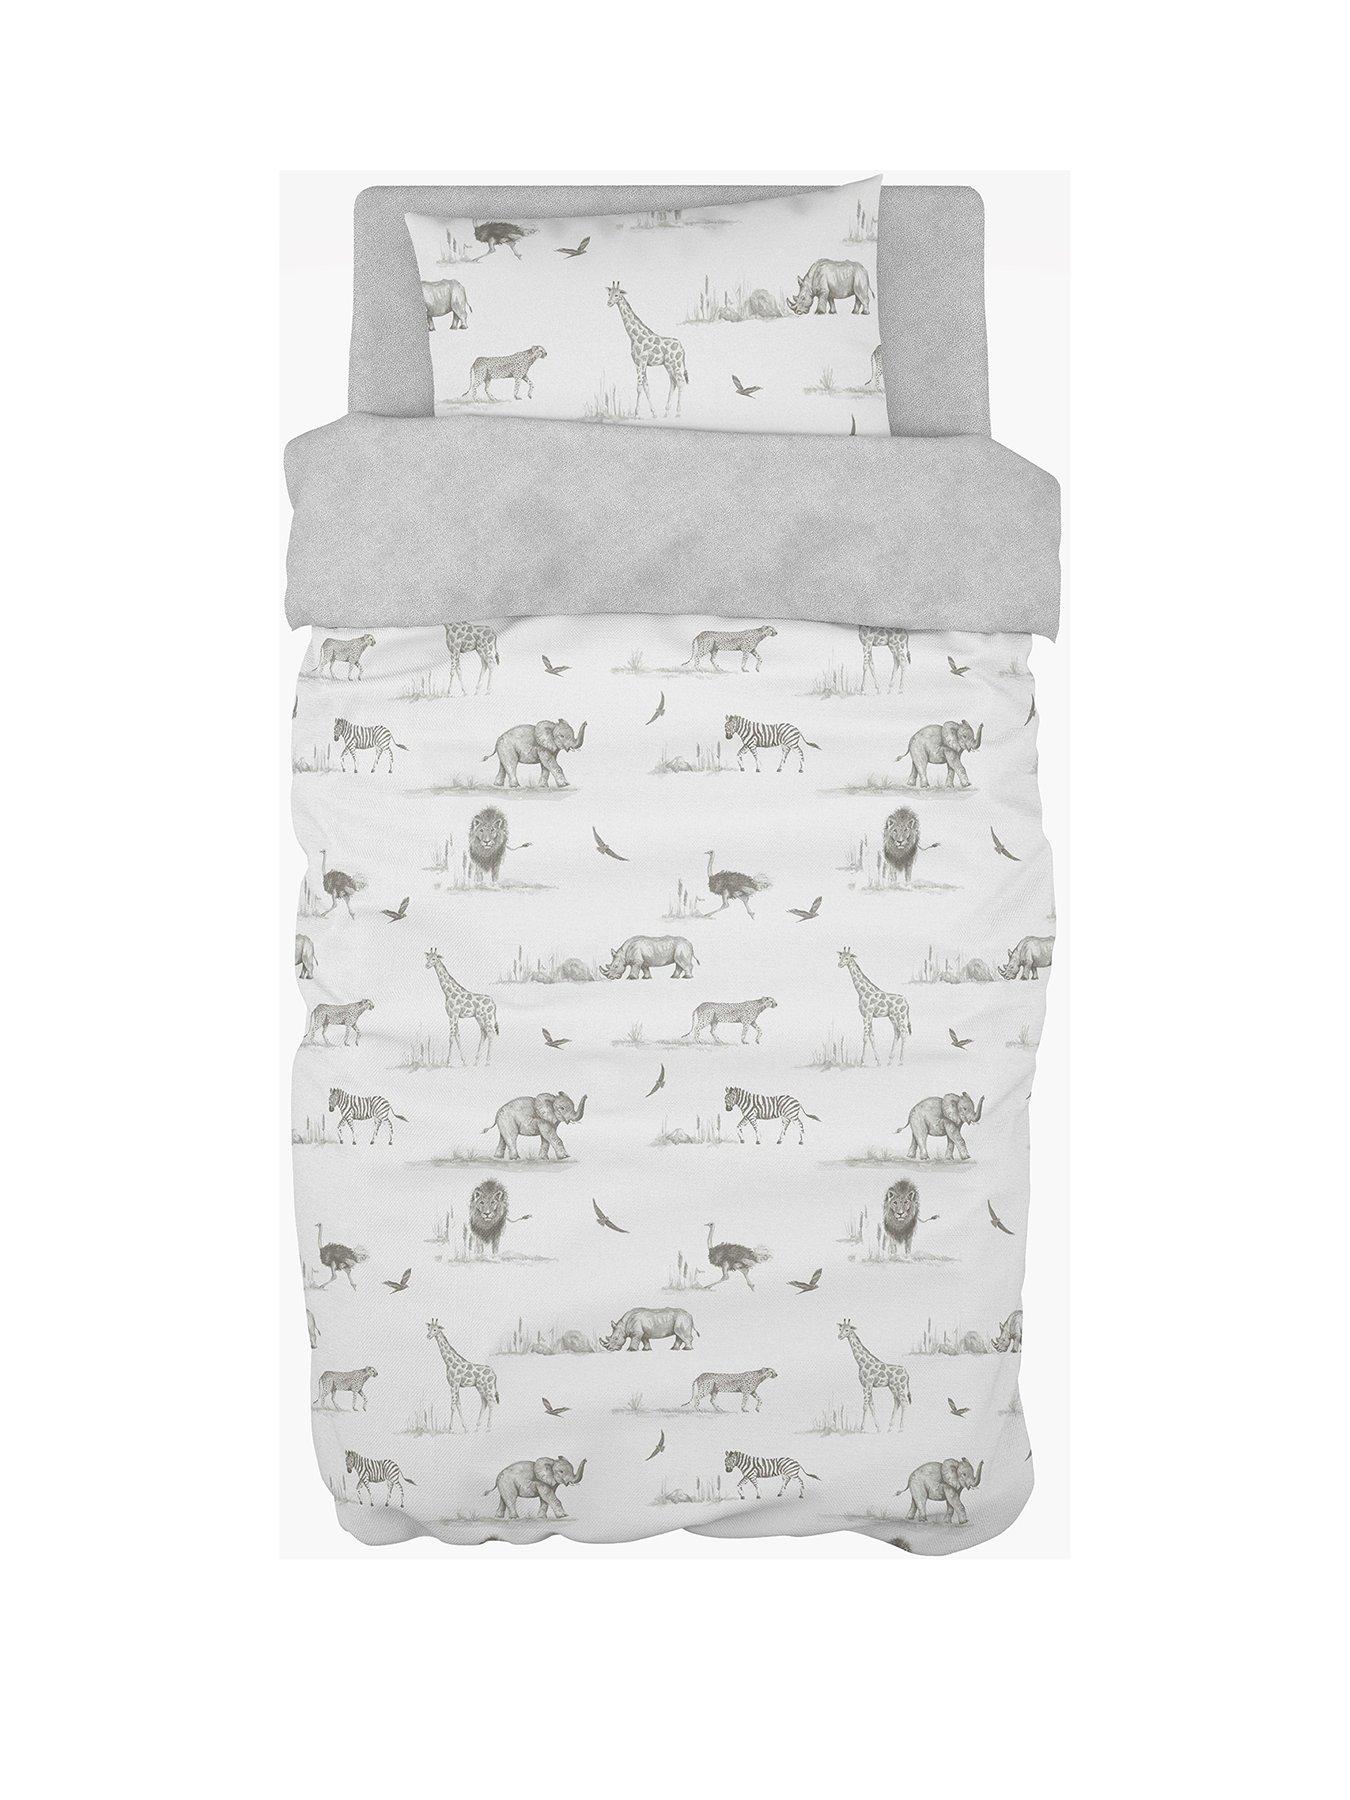 Bumper Bar Wraps Pillowcase And Personalised Fleece Unicorn Cot Bed Quilt 